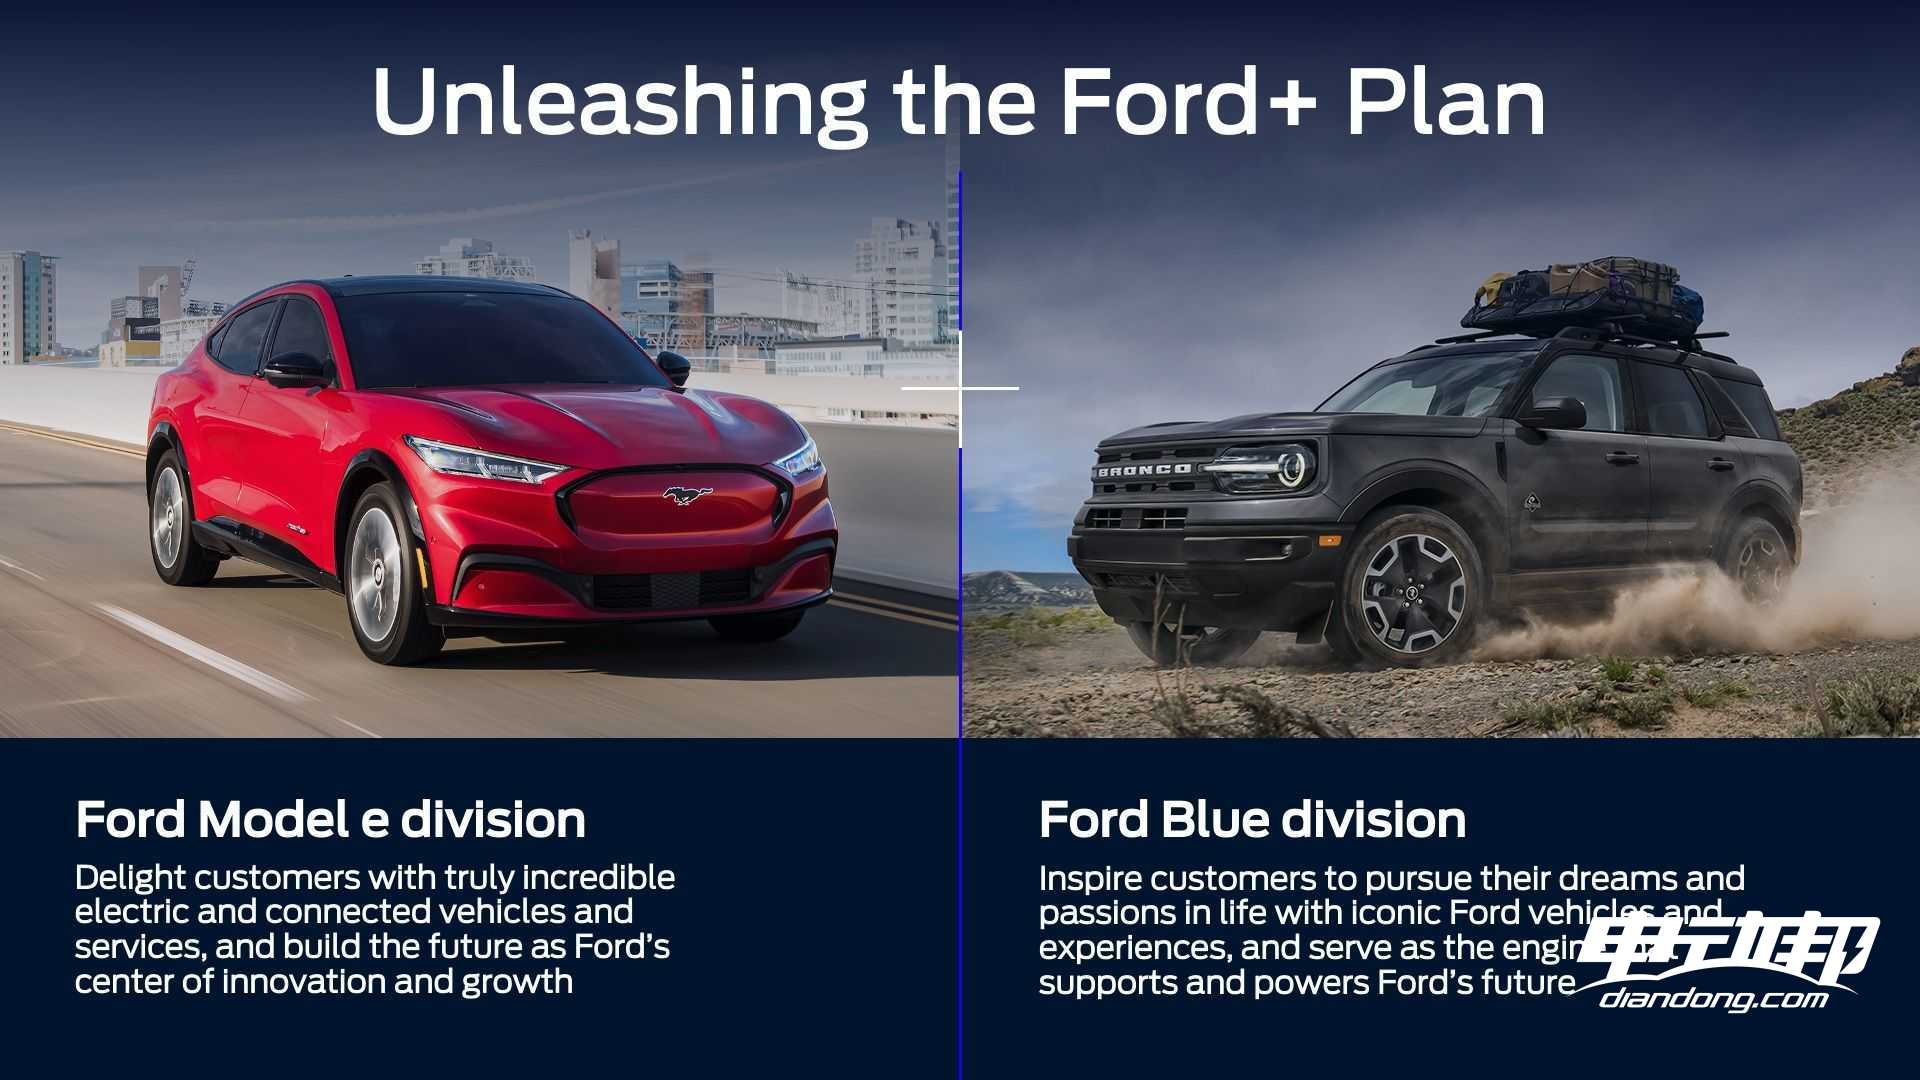 ford-model-e-and-ford-blue-compared.jpg